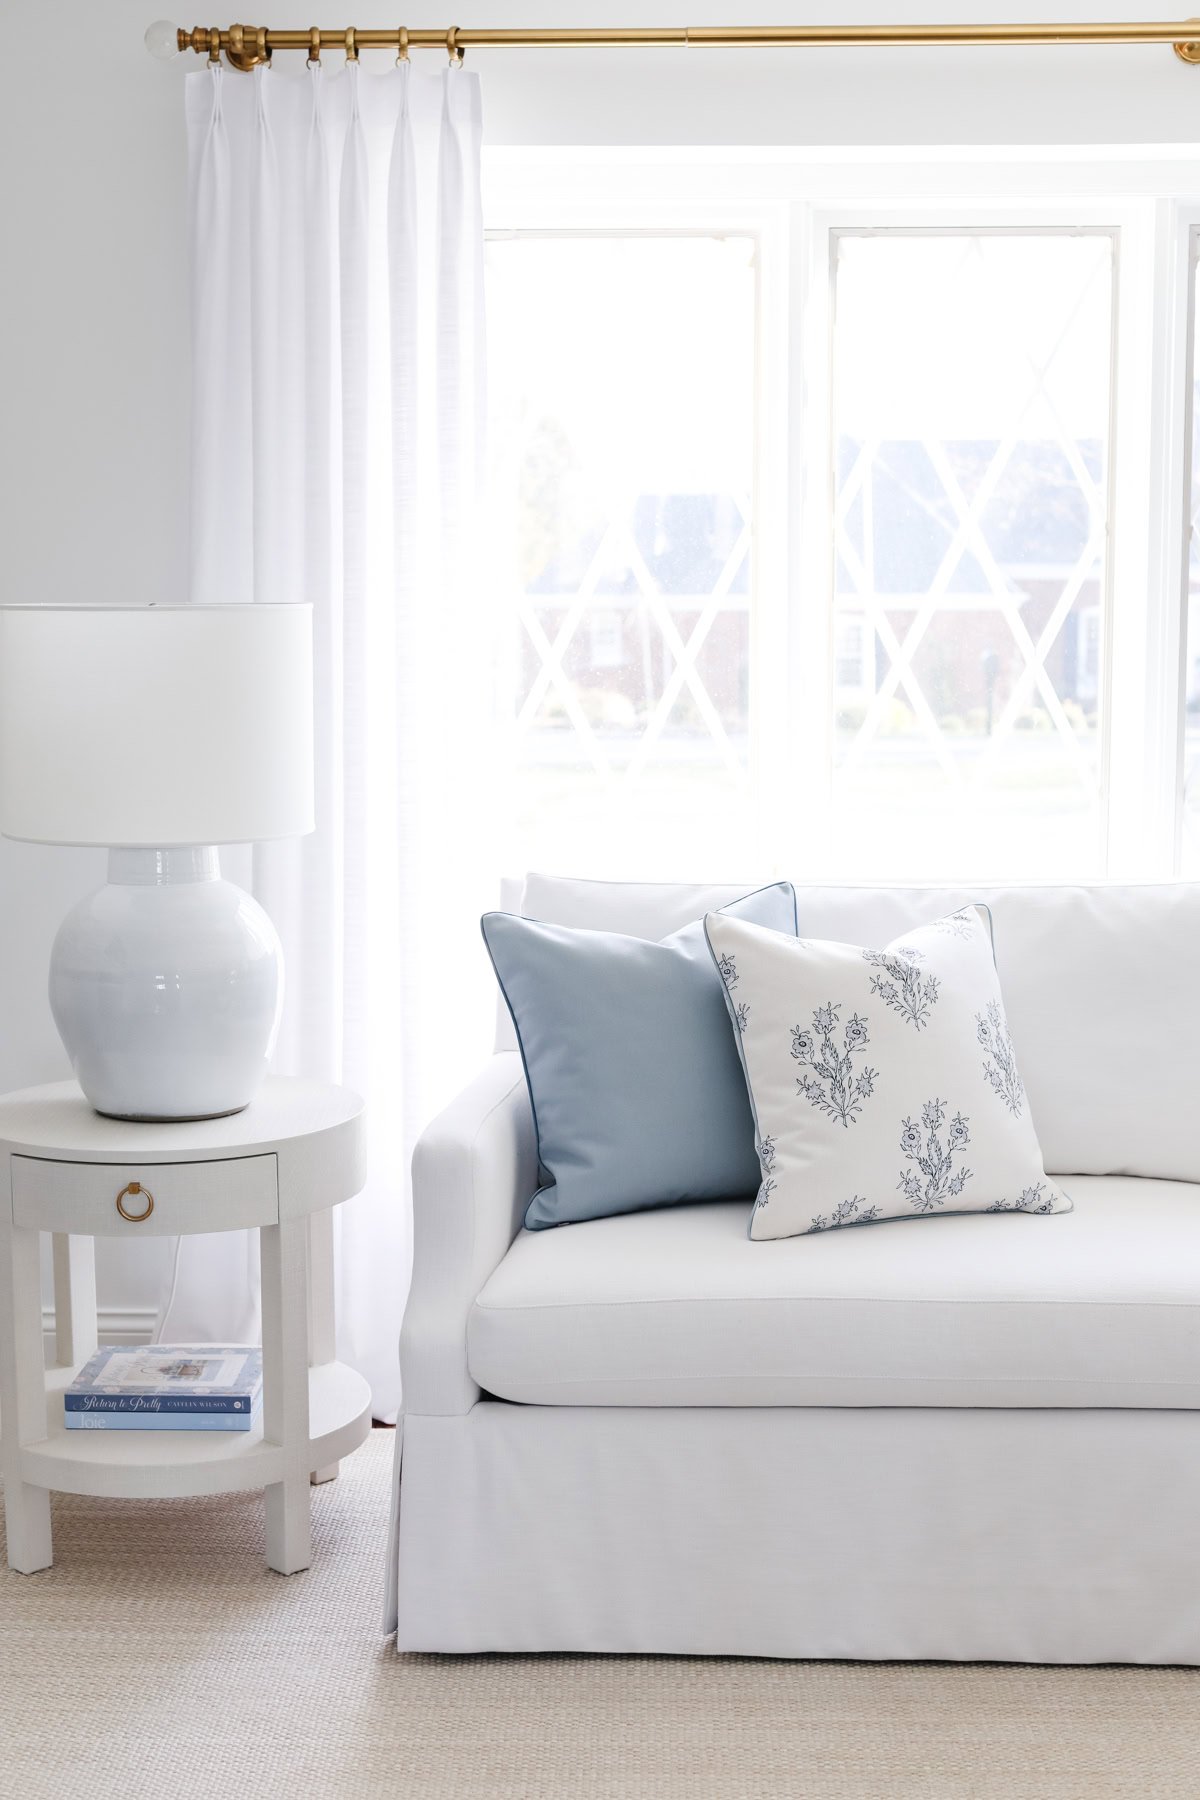 A white sofa with two decorative pillows, one light blue and one white with blue patterns, is placed against a window. Achieve the RH Look for Less with a matching white side table and lamp sitting next to it.